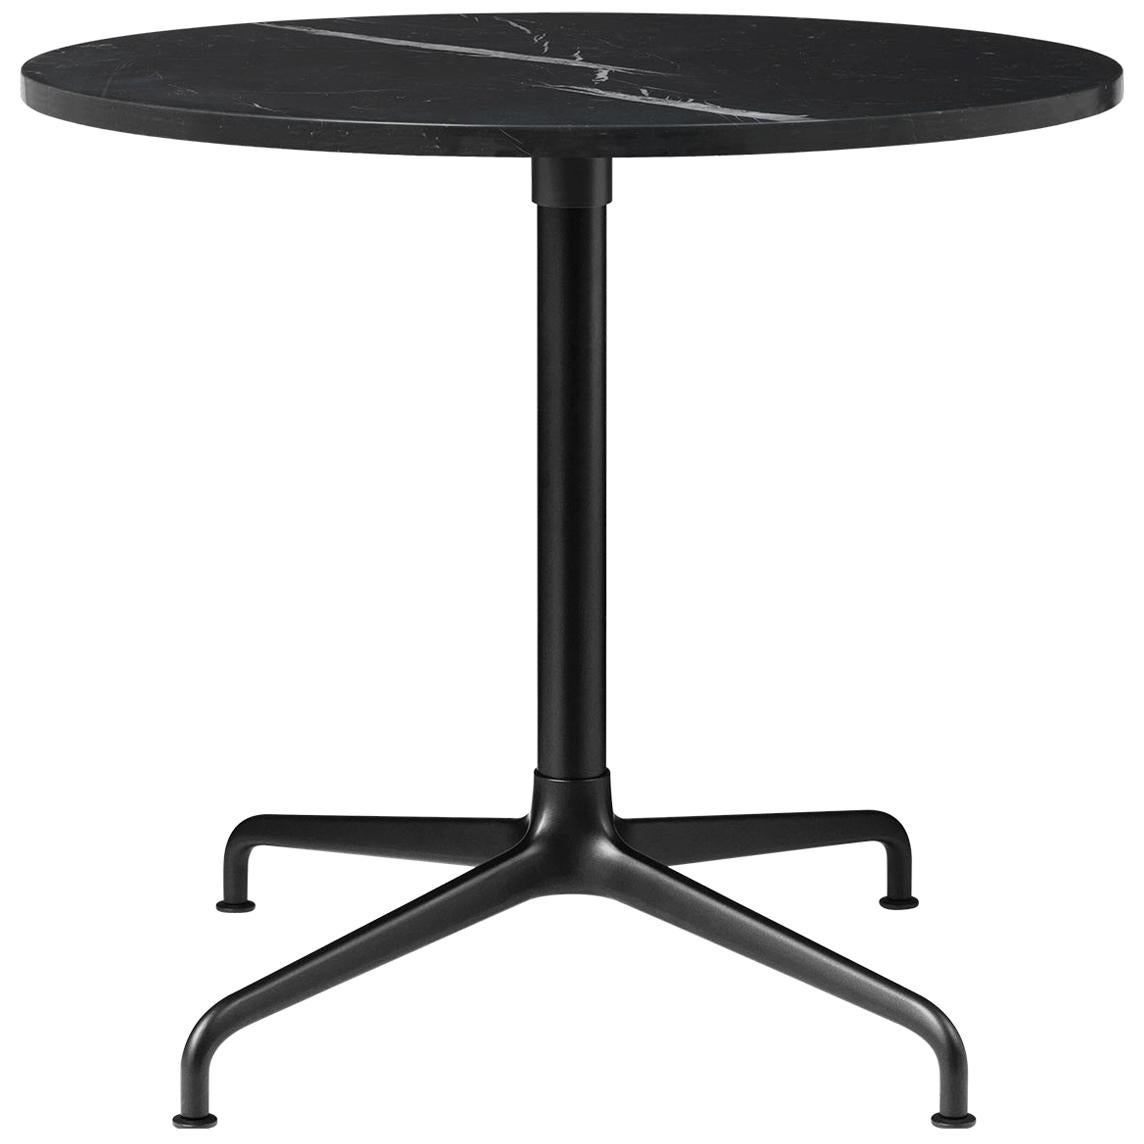 Beetle Lounge Table, Round, 4 Star Base, Large, Marble